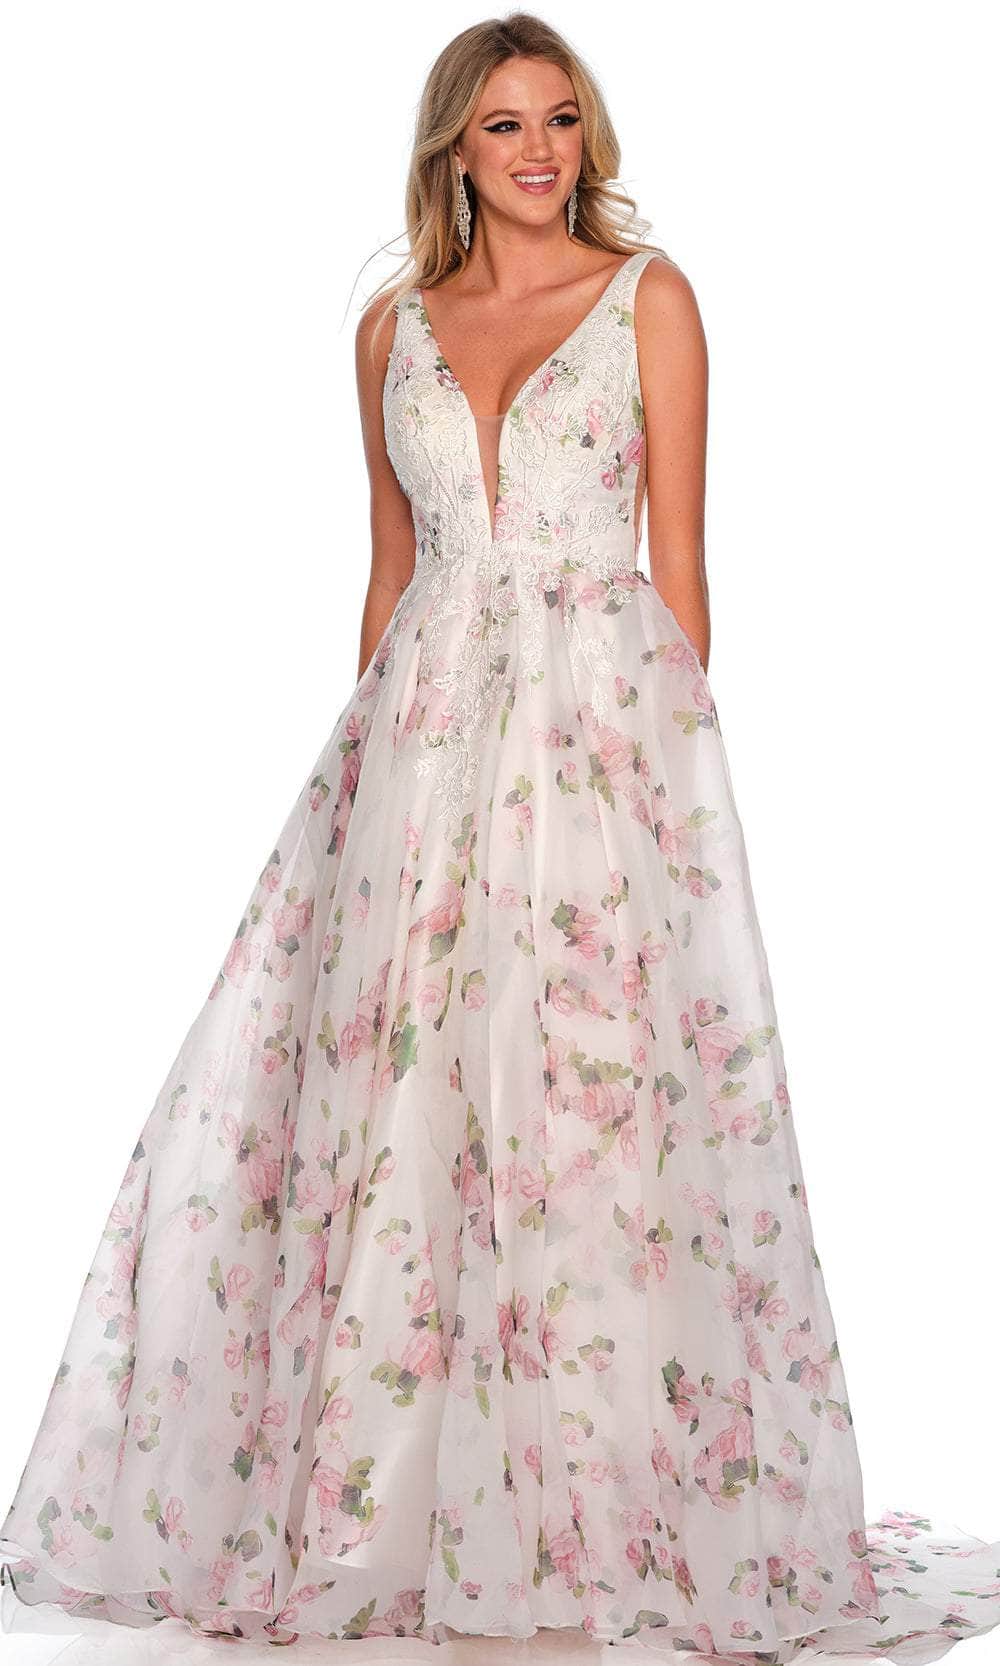 Dave & Johnny 11427 - Plunging V-Neck Floral Printed Prom Gown
